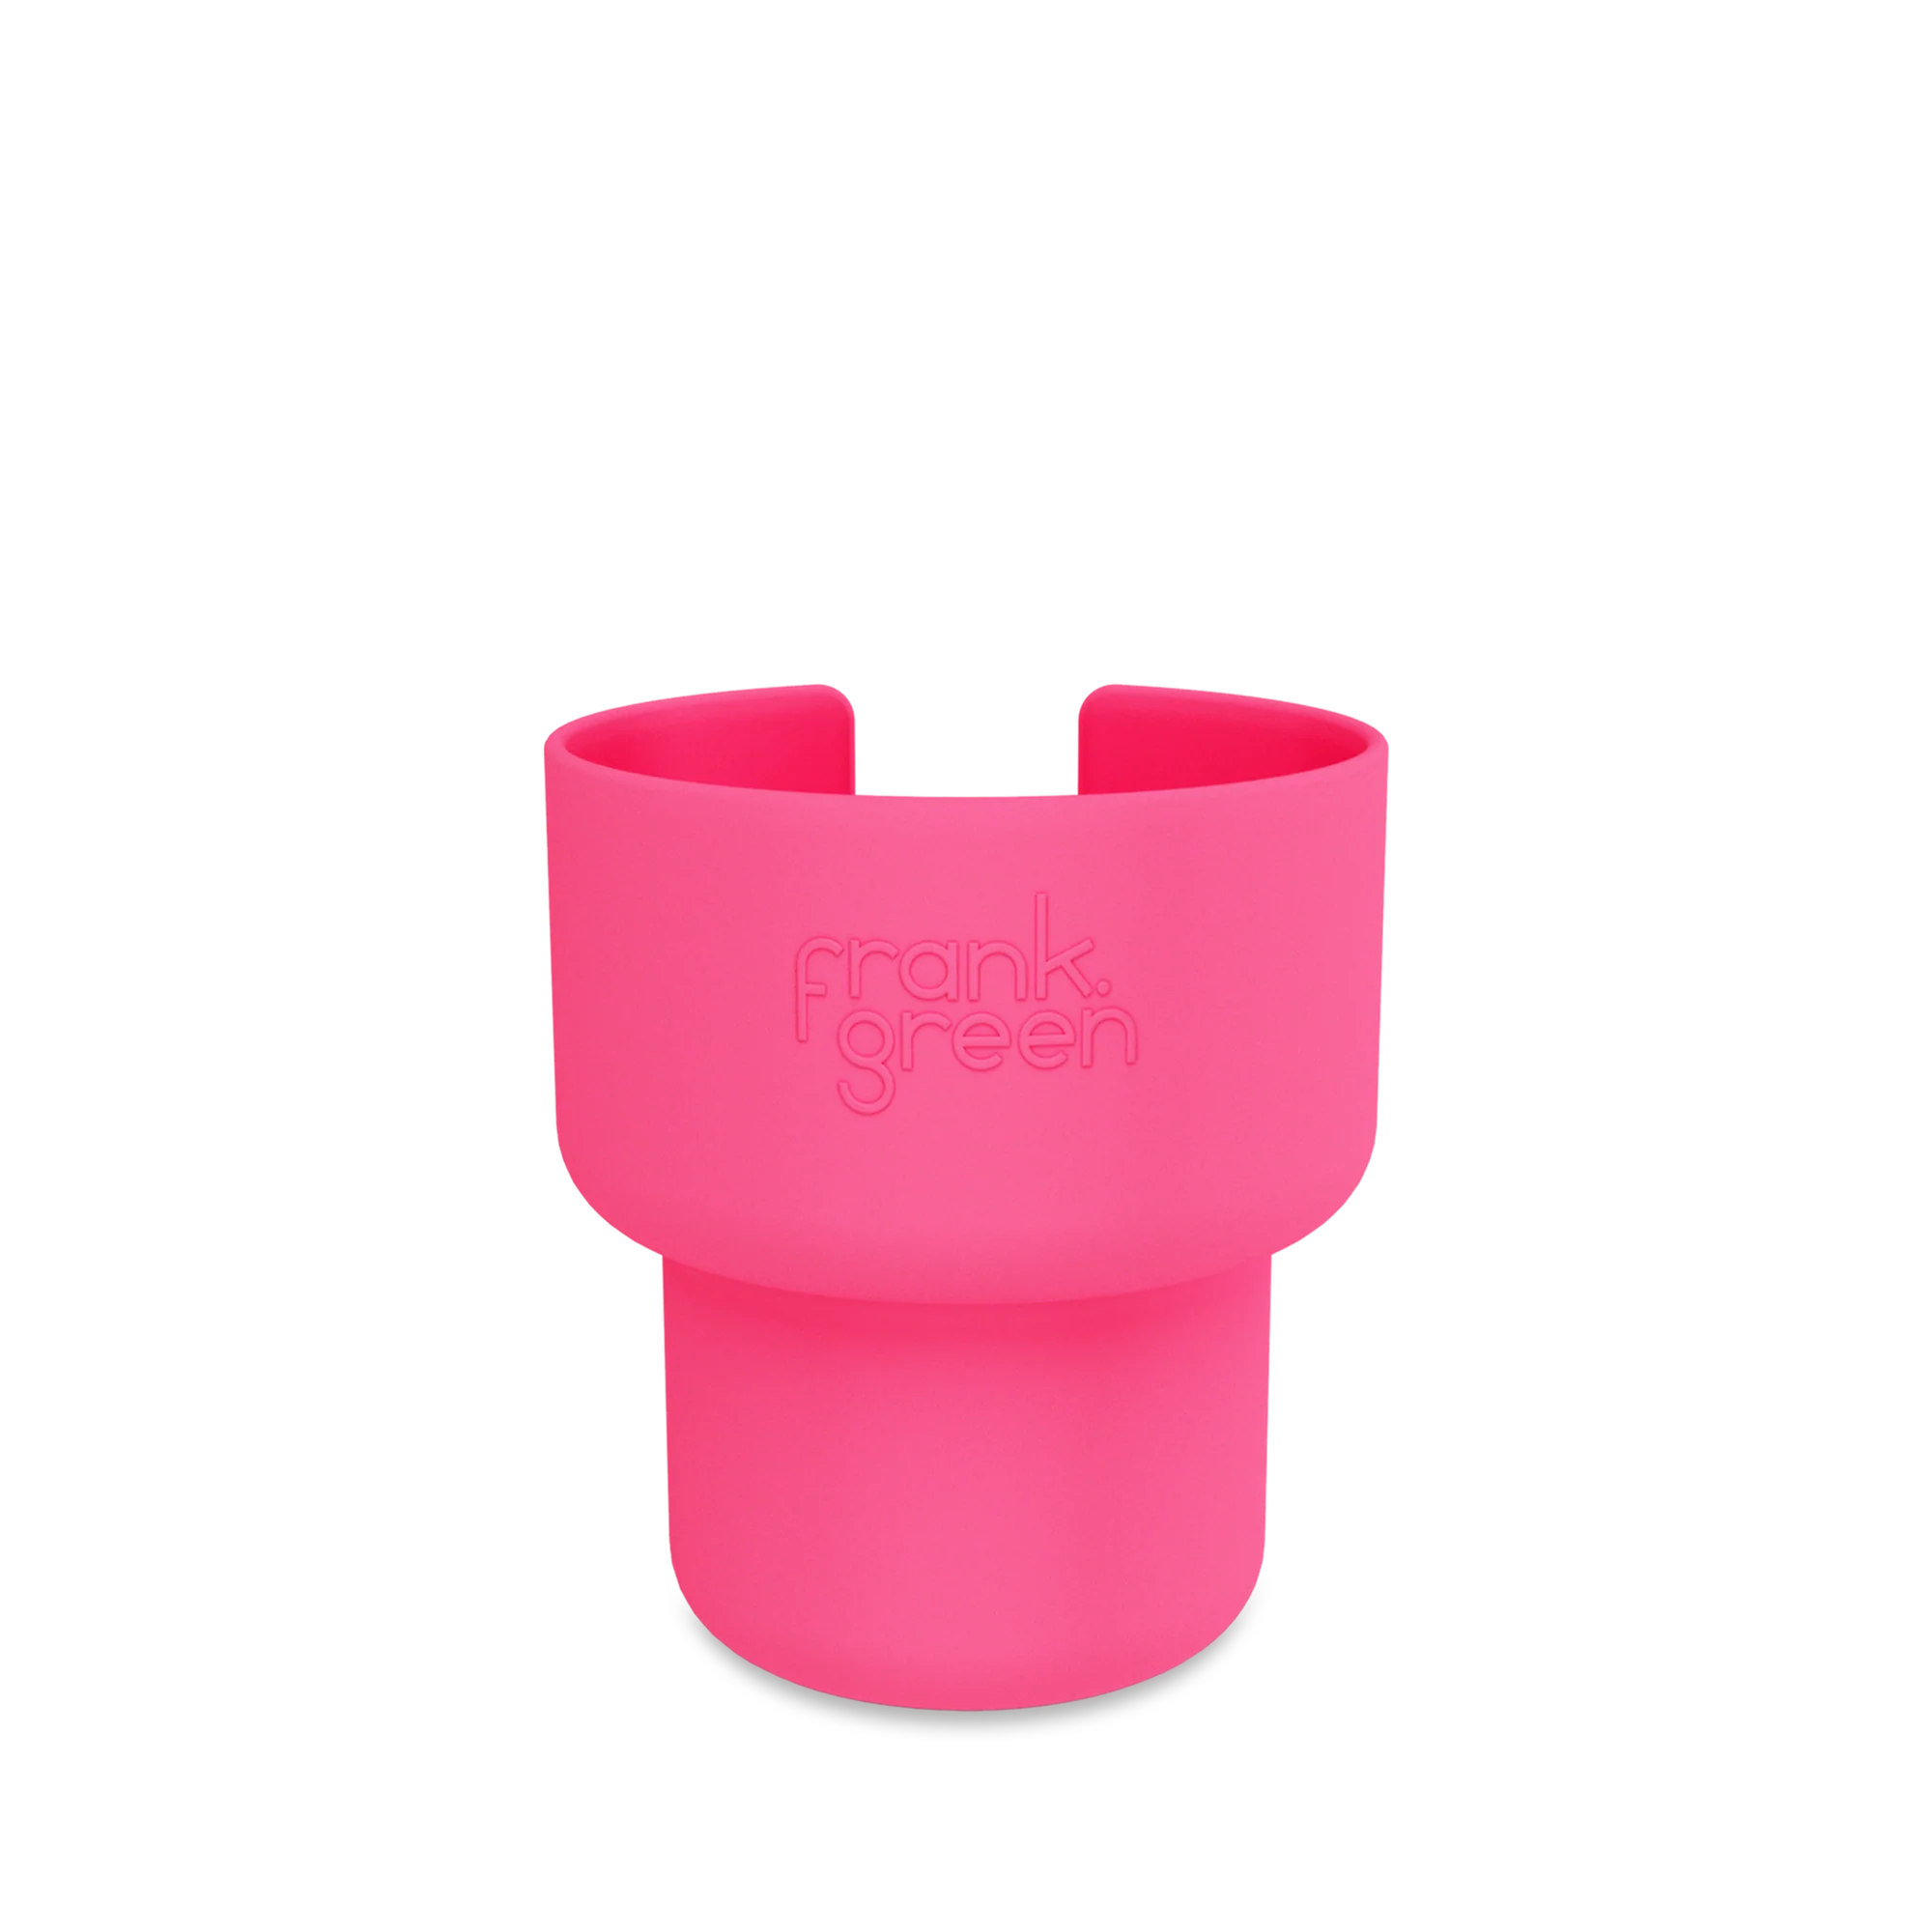 Frank Green Car Cup Holder Expander Neon Pink